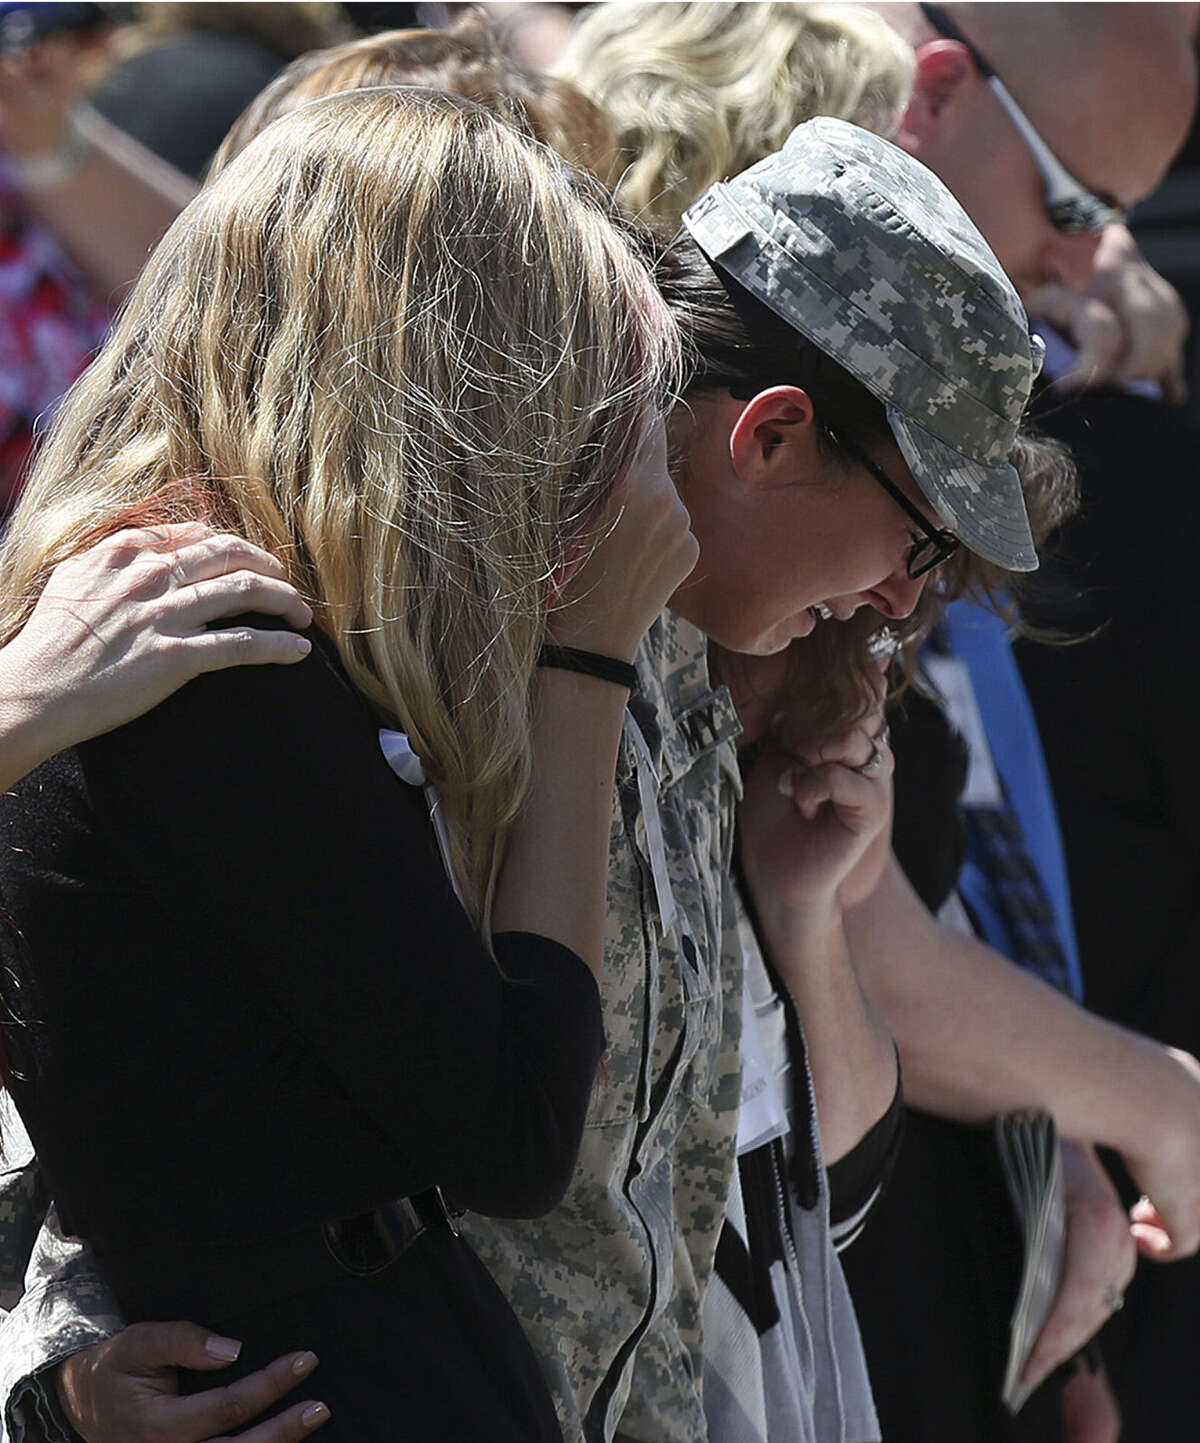 Some 3,000 turned out to mourn the killings of Sgt. 1st Class Daniel Michael Ferguson of Mulberry, Fla.; Staff Sgt. Carlos Alberto Lazaney-Rodriguez of Aguadilla, Puerto Rico; and Sgt. Timothy Wayne Owens of Effingham, Ill.